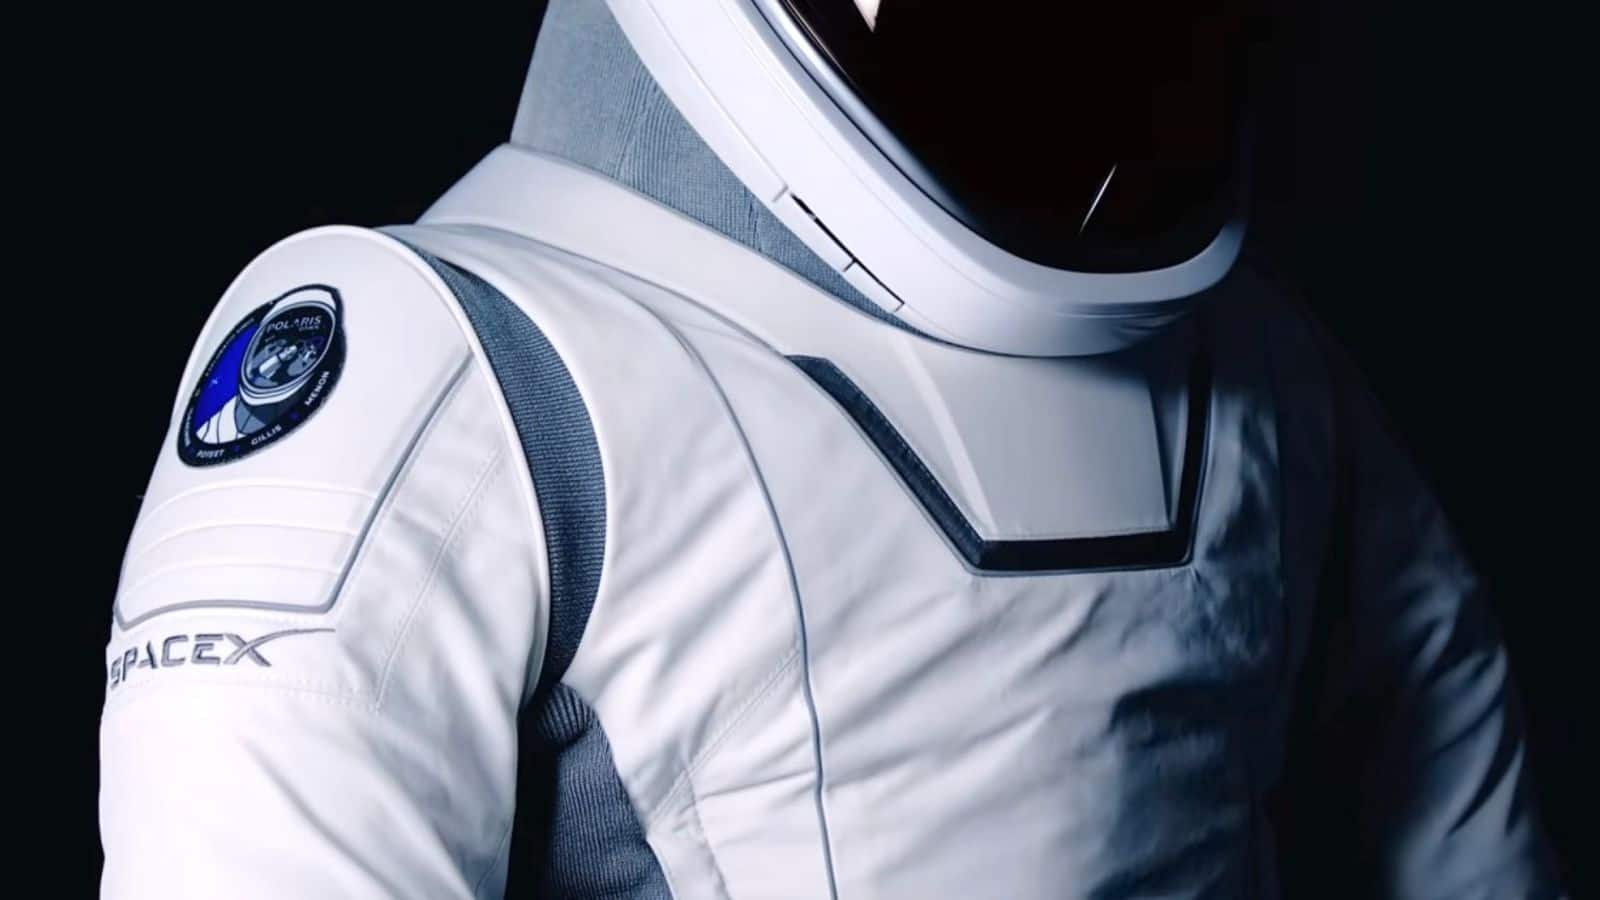 SpaceX unveils innovative spacesuit for first commercial astronaut spacewalk